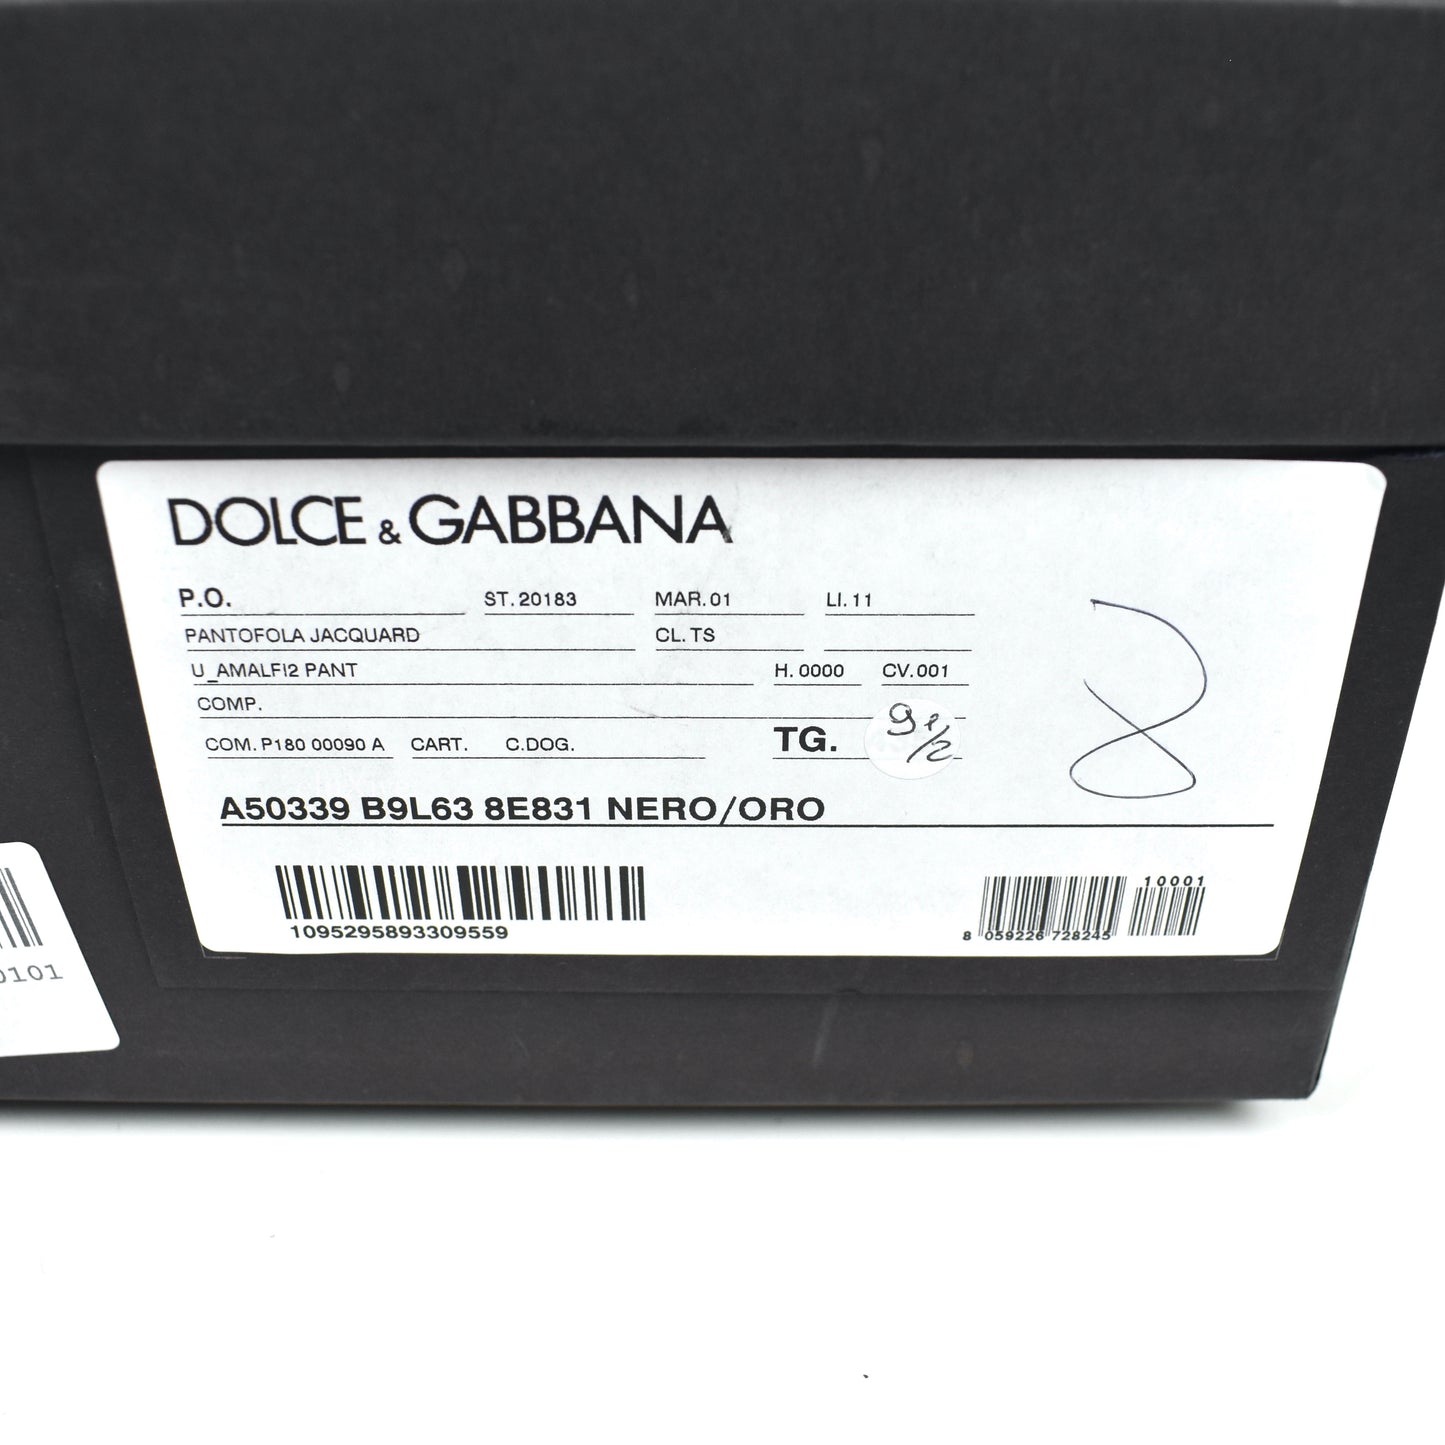 Dolce & Gabbana - Black / Gold Floral Woven Smoking Slippers